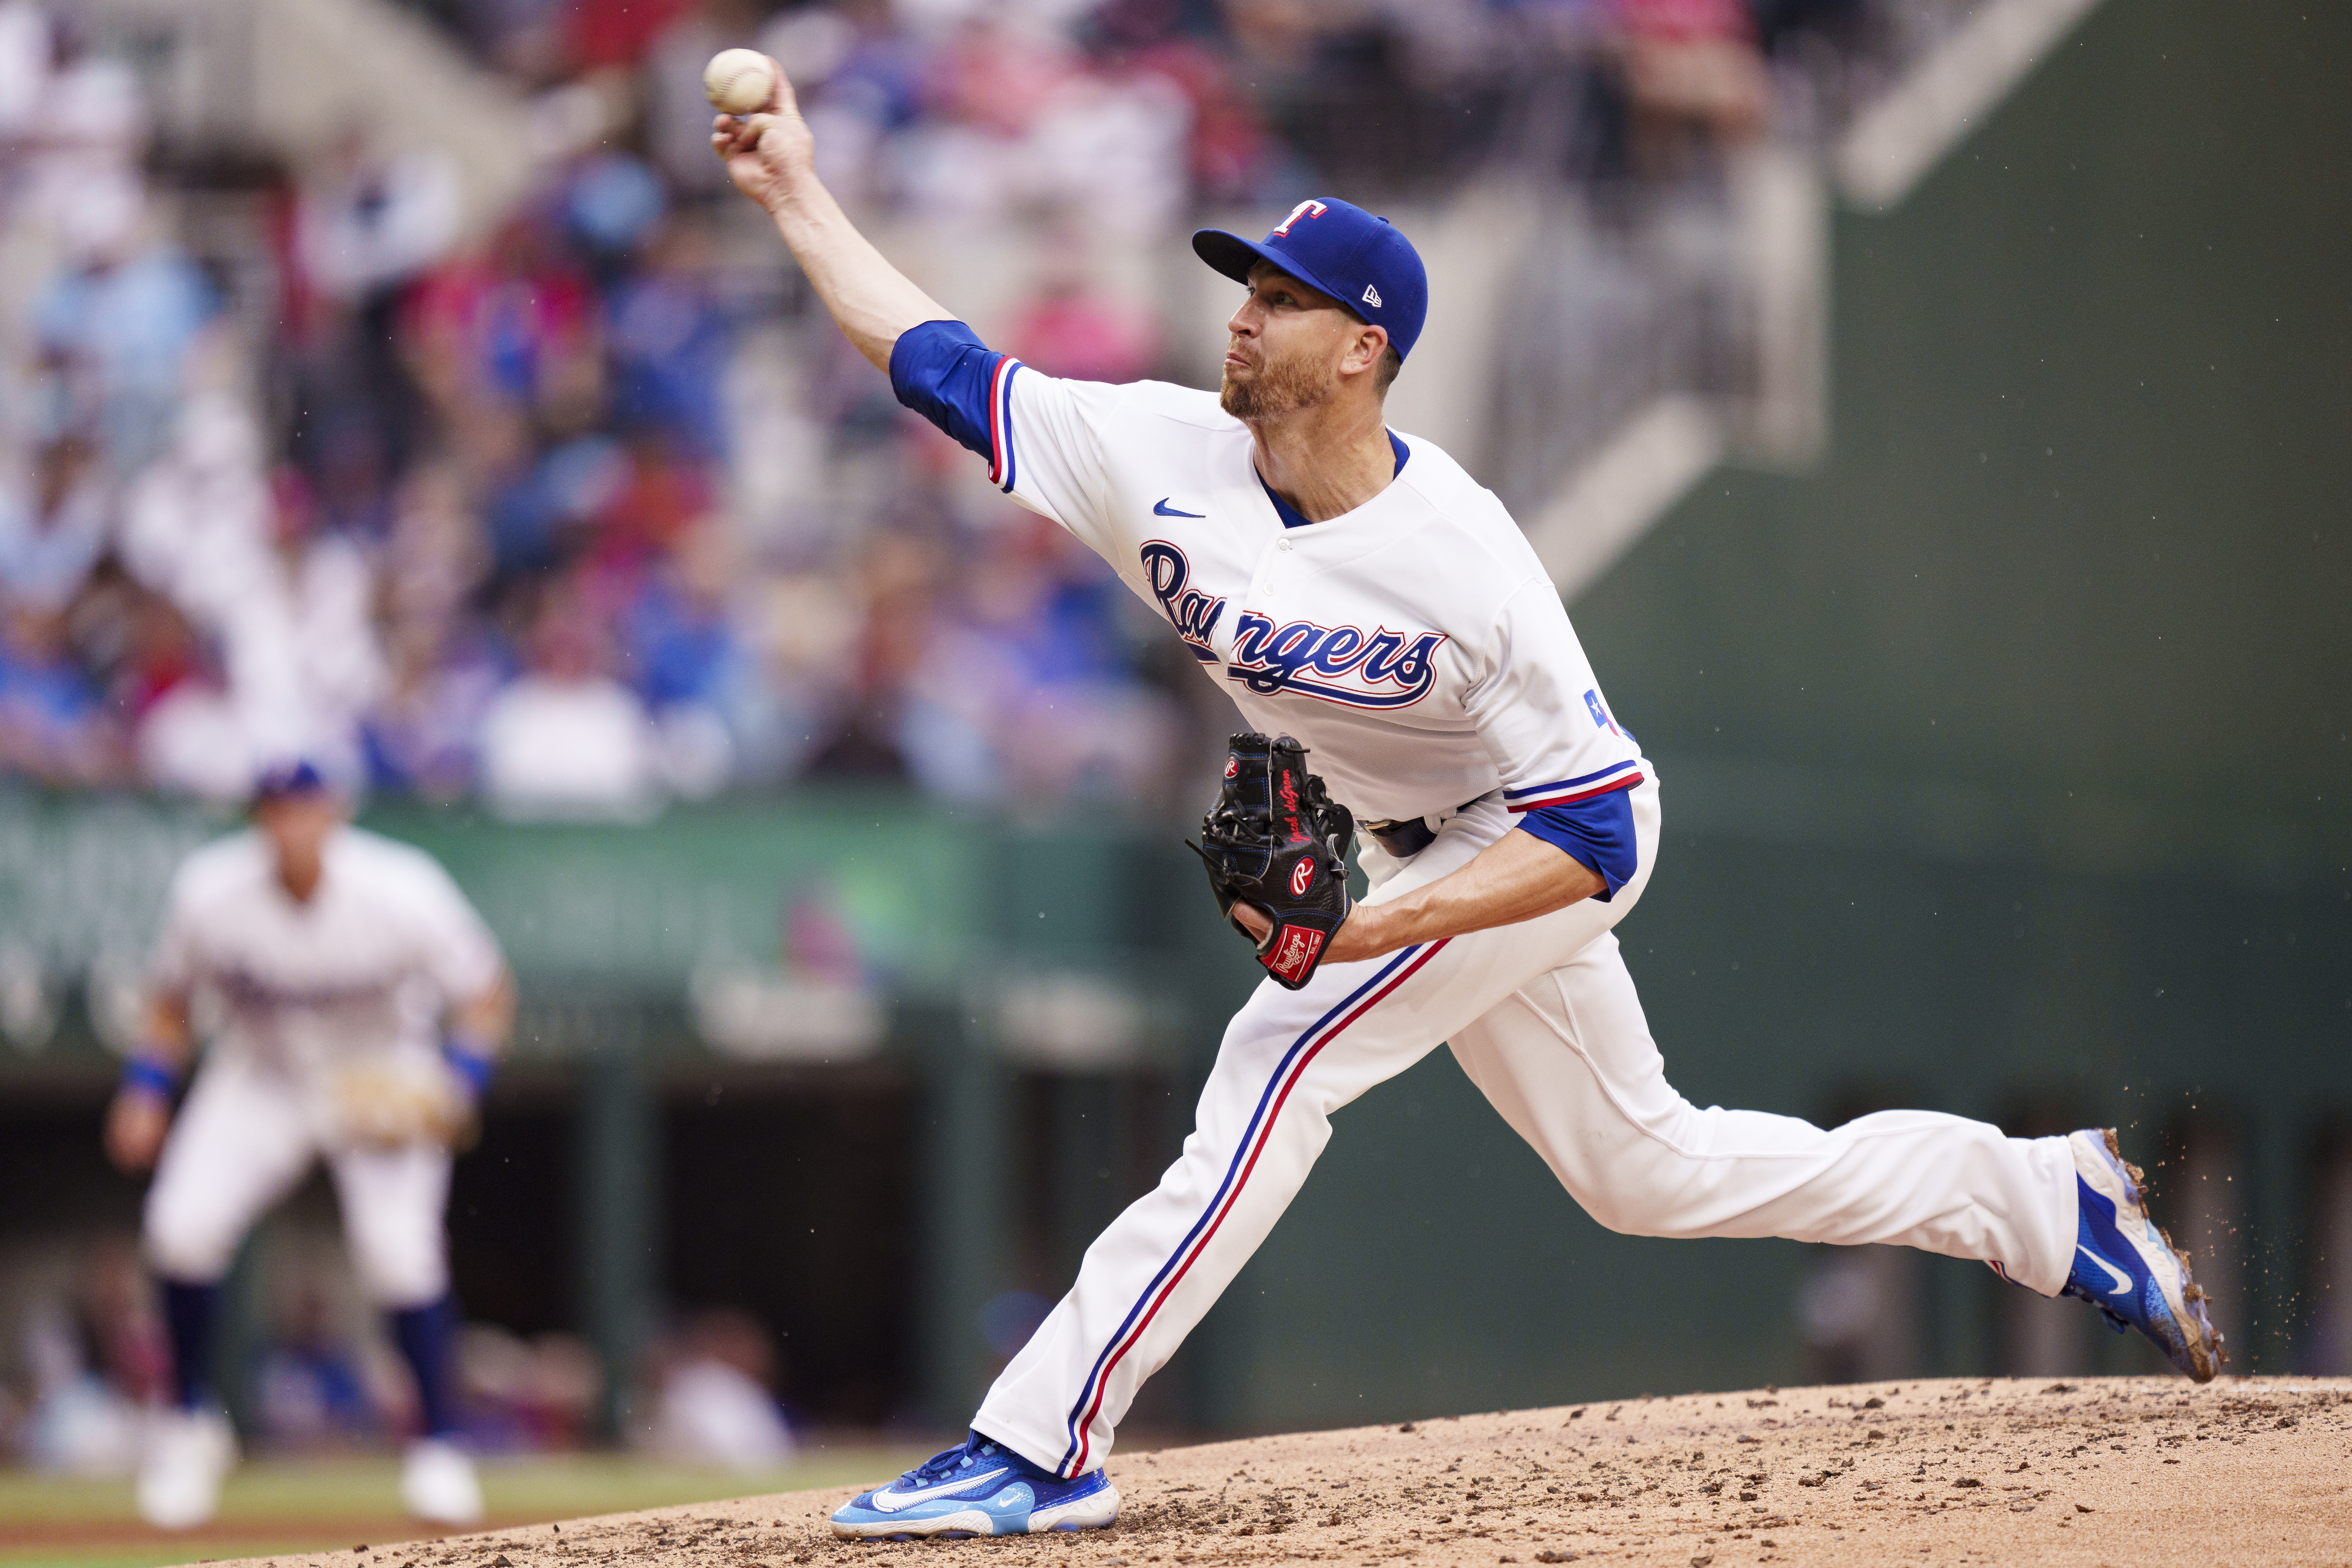 Pitcher Jacob deGrom of the Texas Rangers throws in the game against the Philadelphia Phillies at Globe Life Field in Arlington, Texas, March 30, 2023. /CFP 